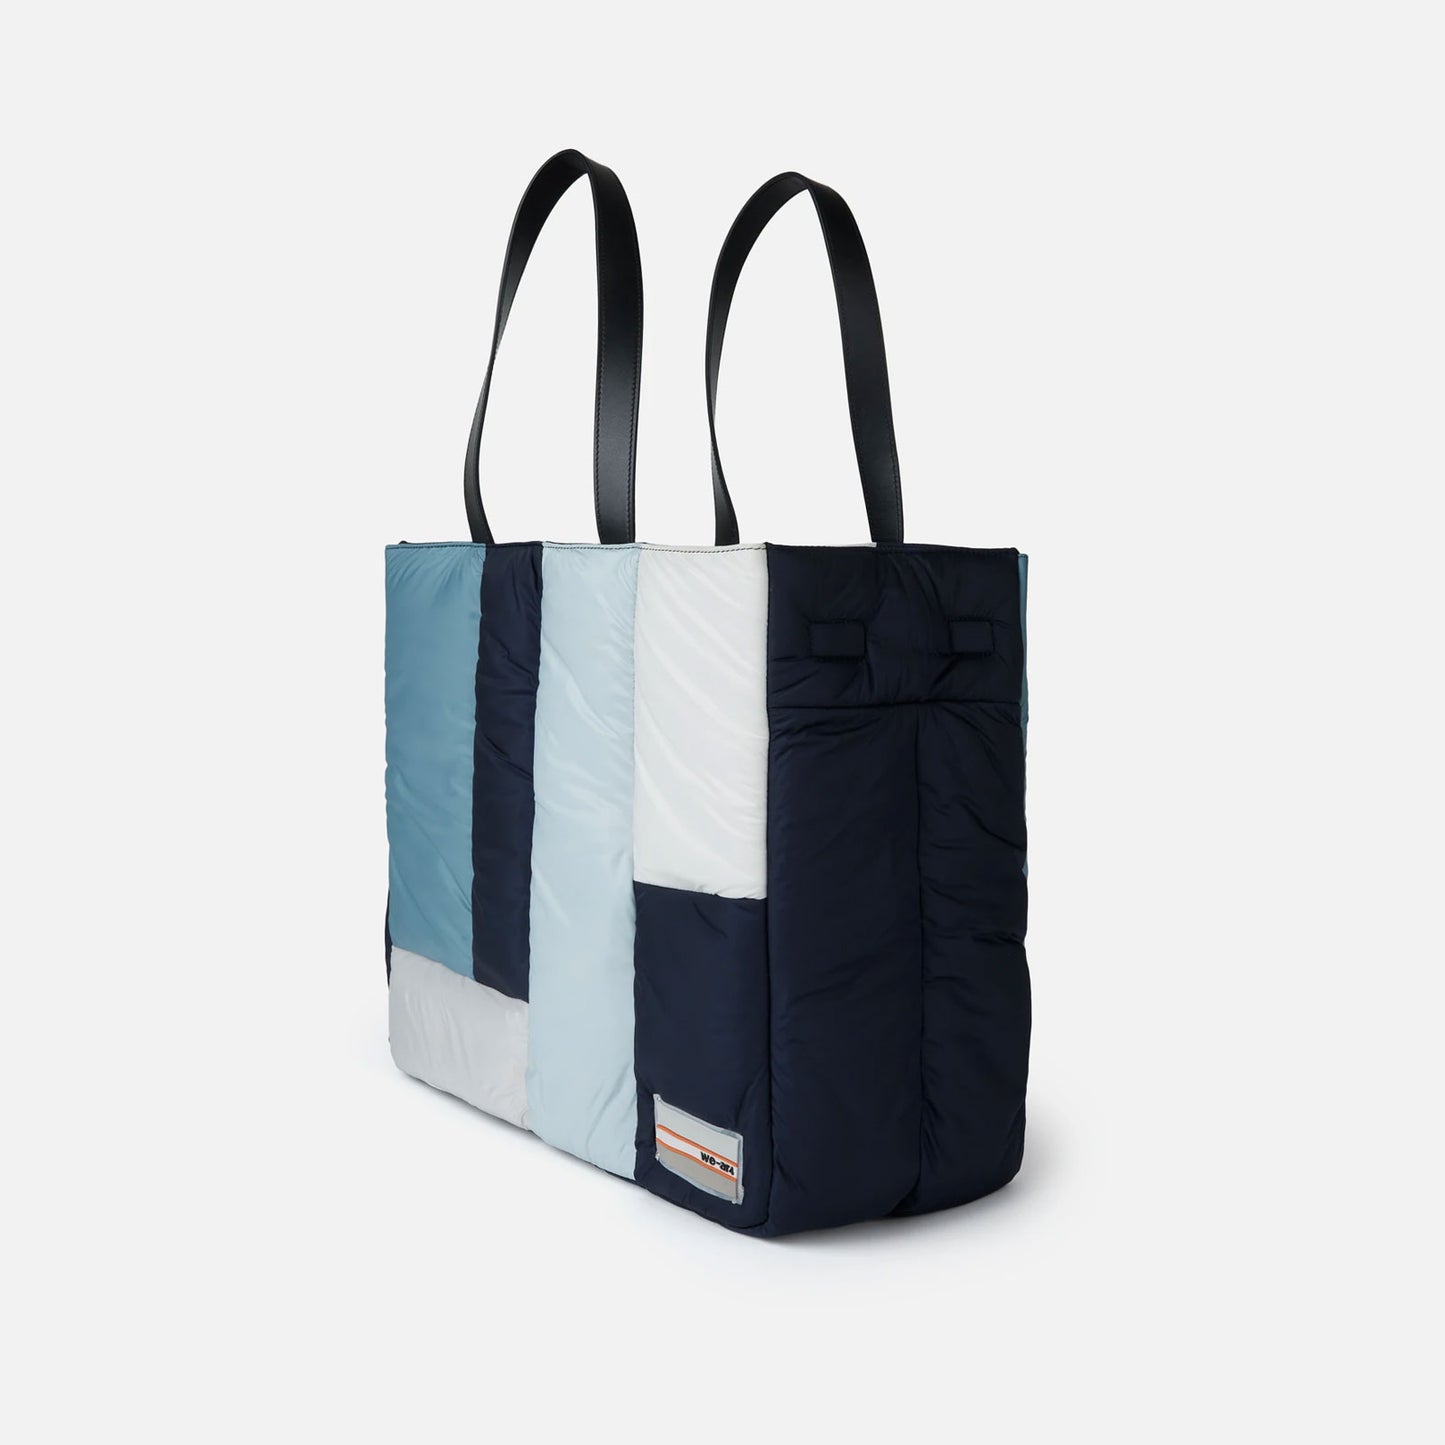 The Excess Tote Bag in Pale Blue Multi